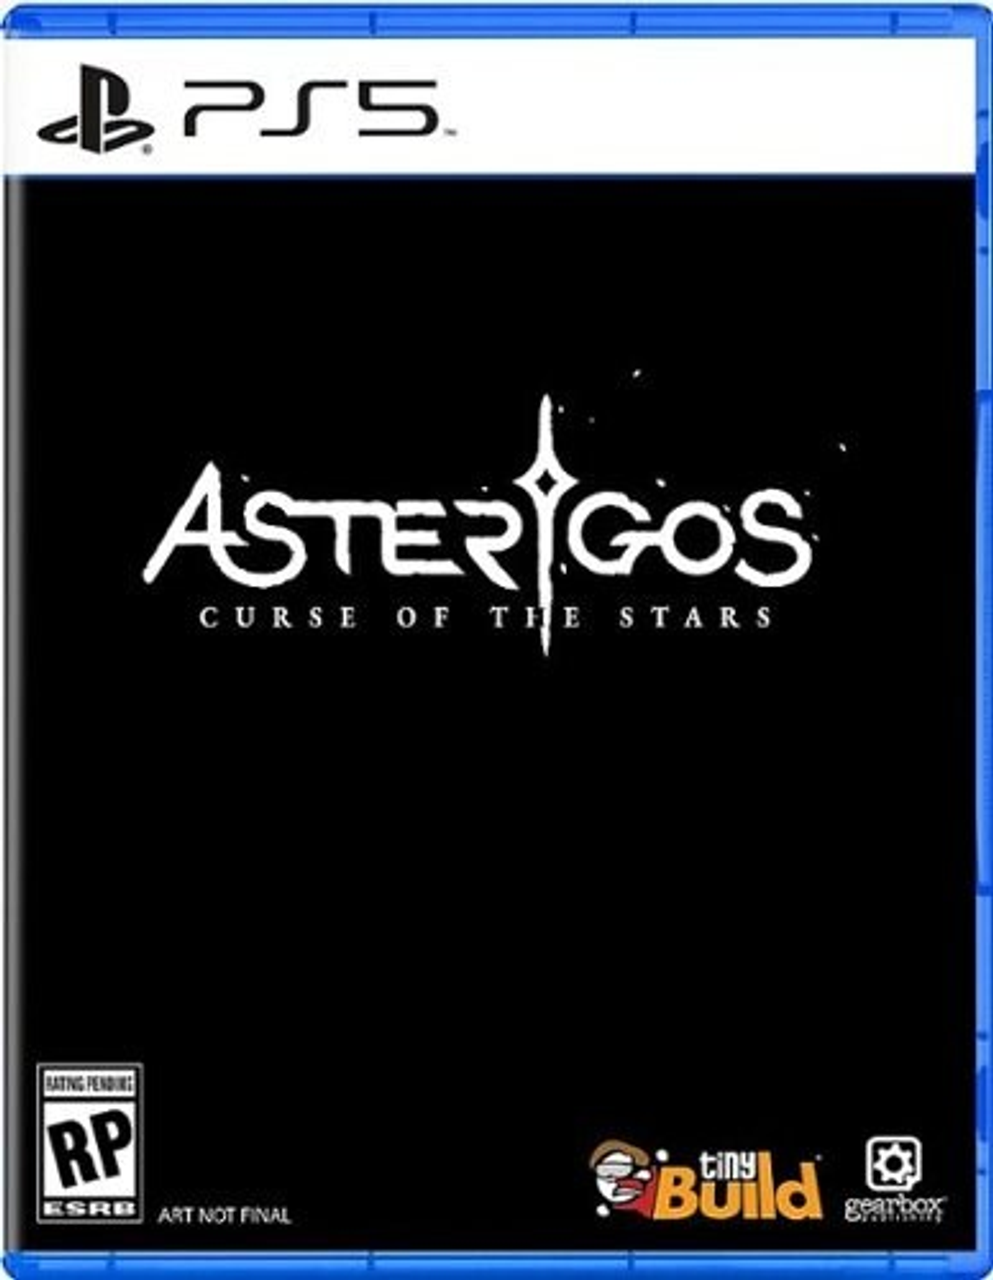 Asterigos: Curse of the Stars Deluxe Edition - PlayStation 5